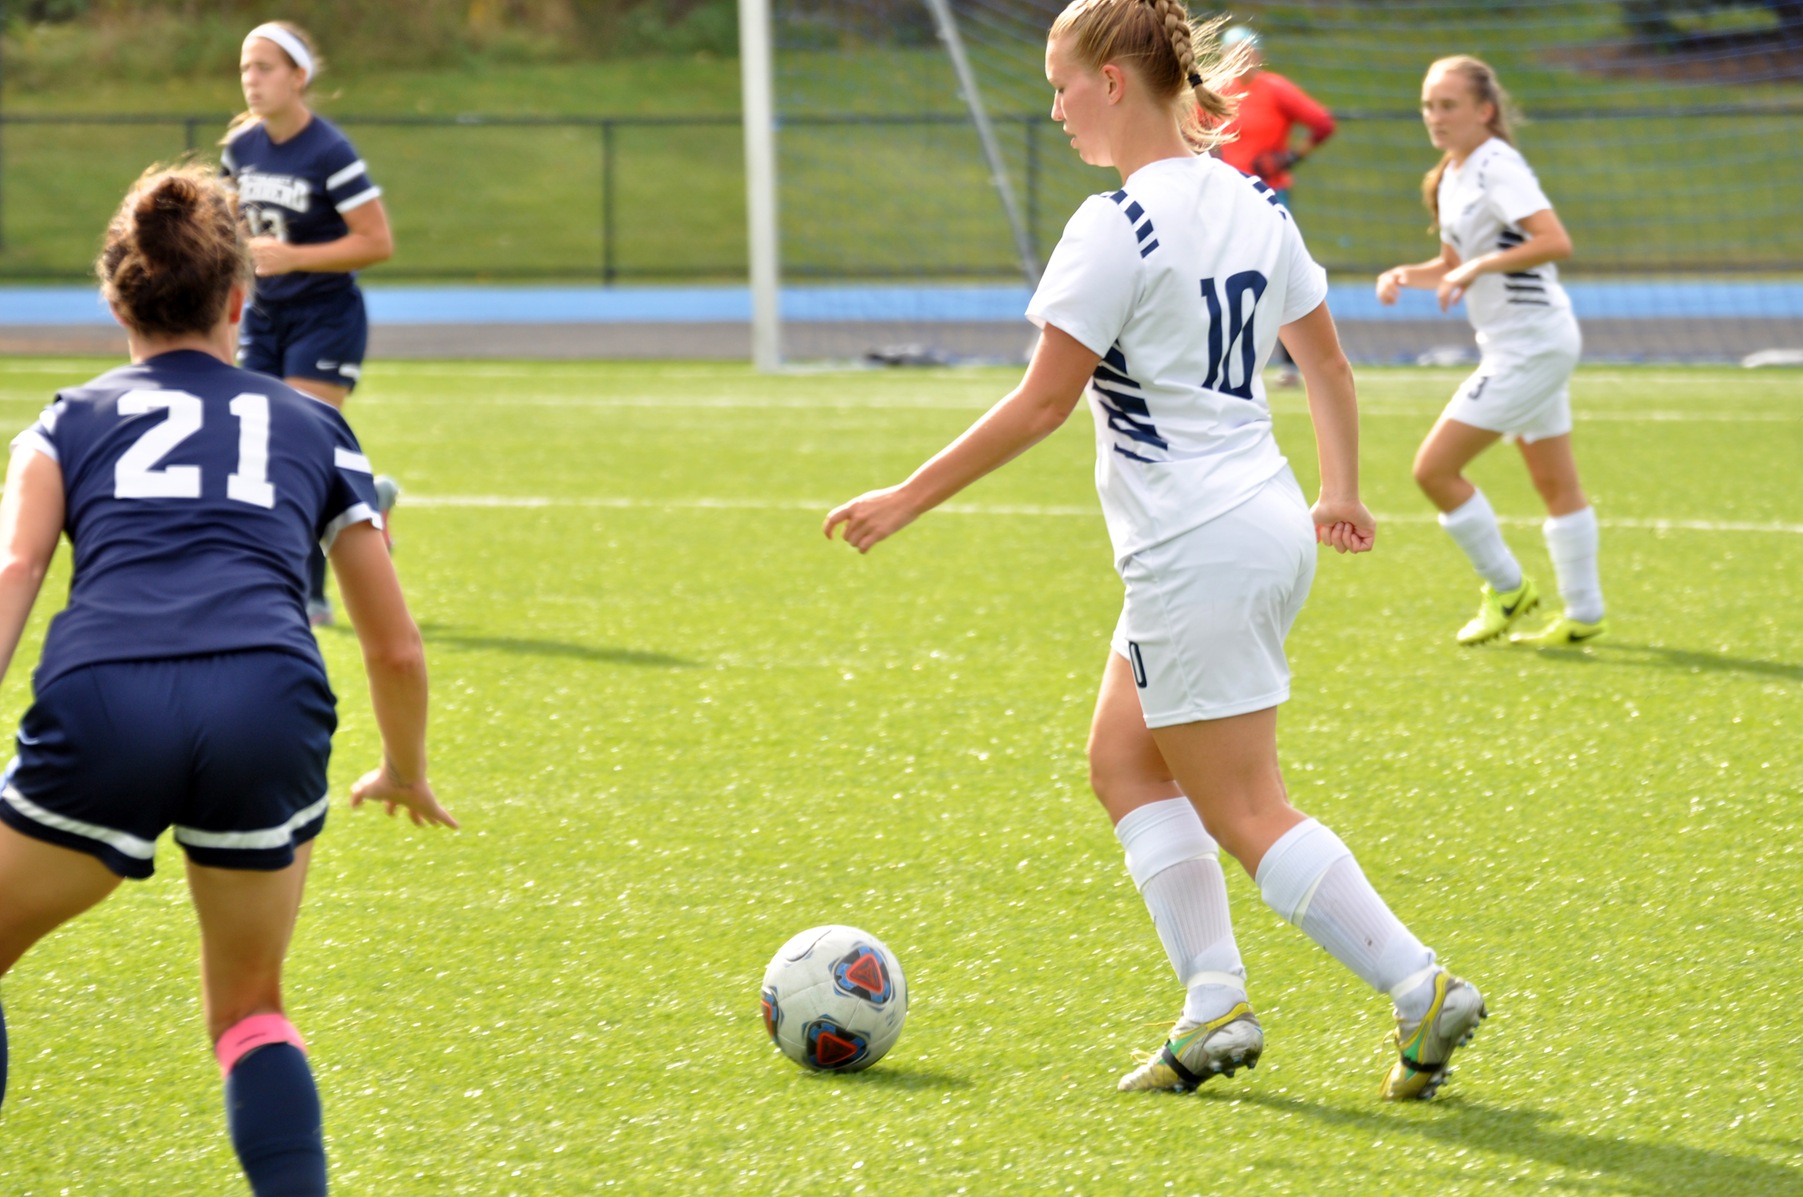 Photo (by Joel Nelson): Penn State Altoona freshman defender Rylee Duck looks to move the ball away from Penn State Behrend's #21 Sami Lowry during Saturday's game at Spring Run Stadium.